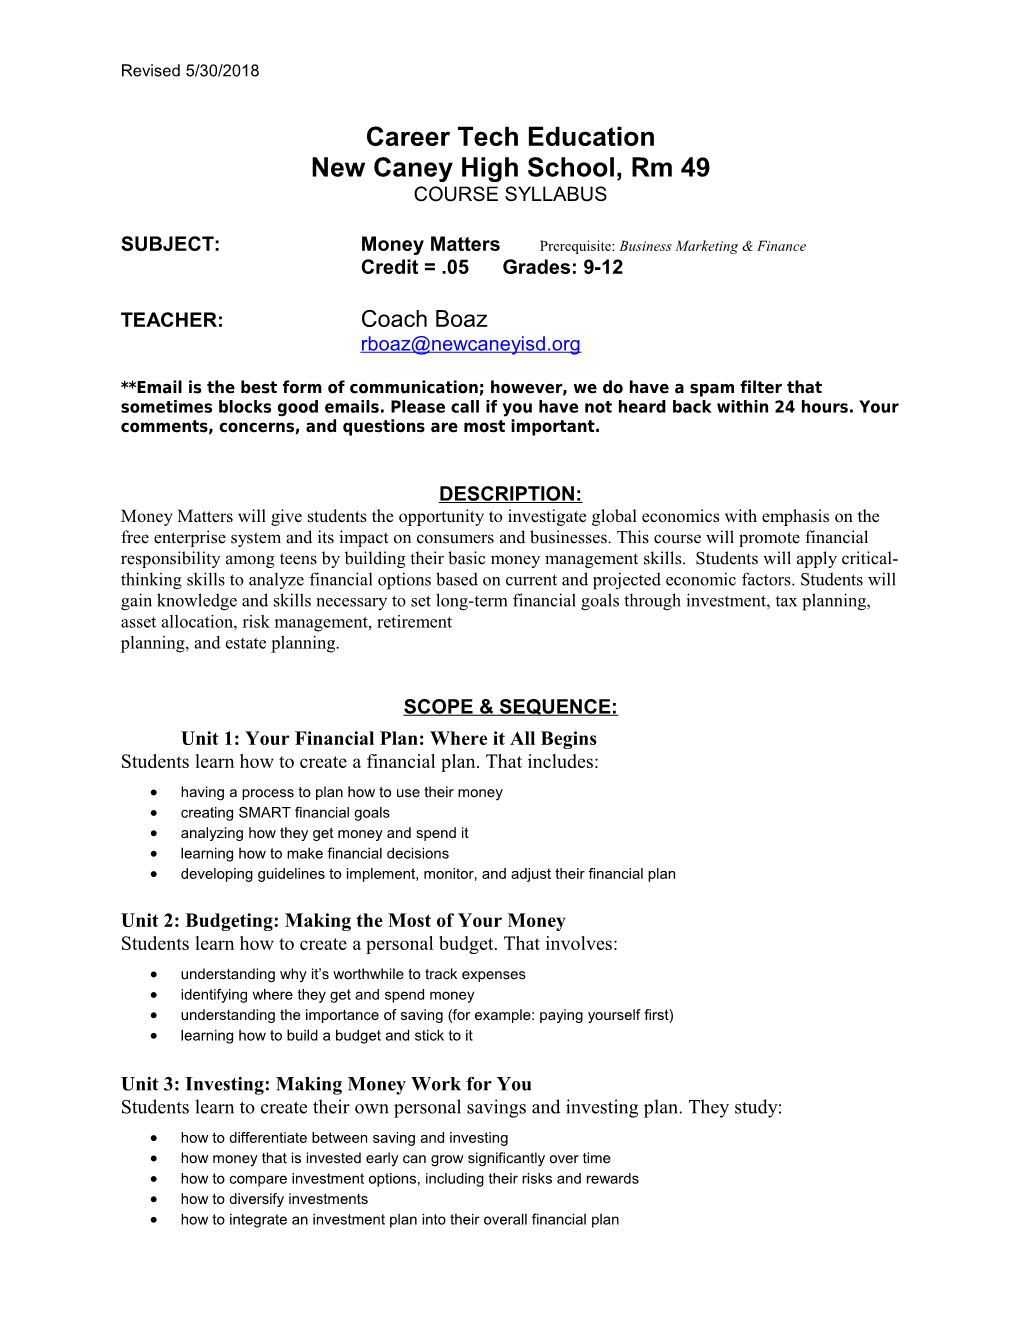 New Caney High School, Rm 49